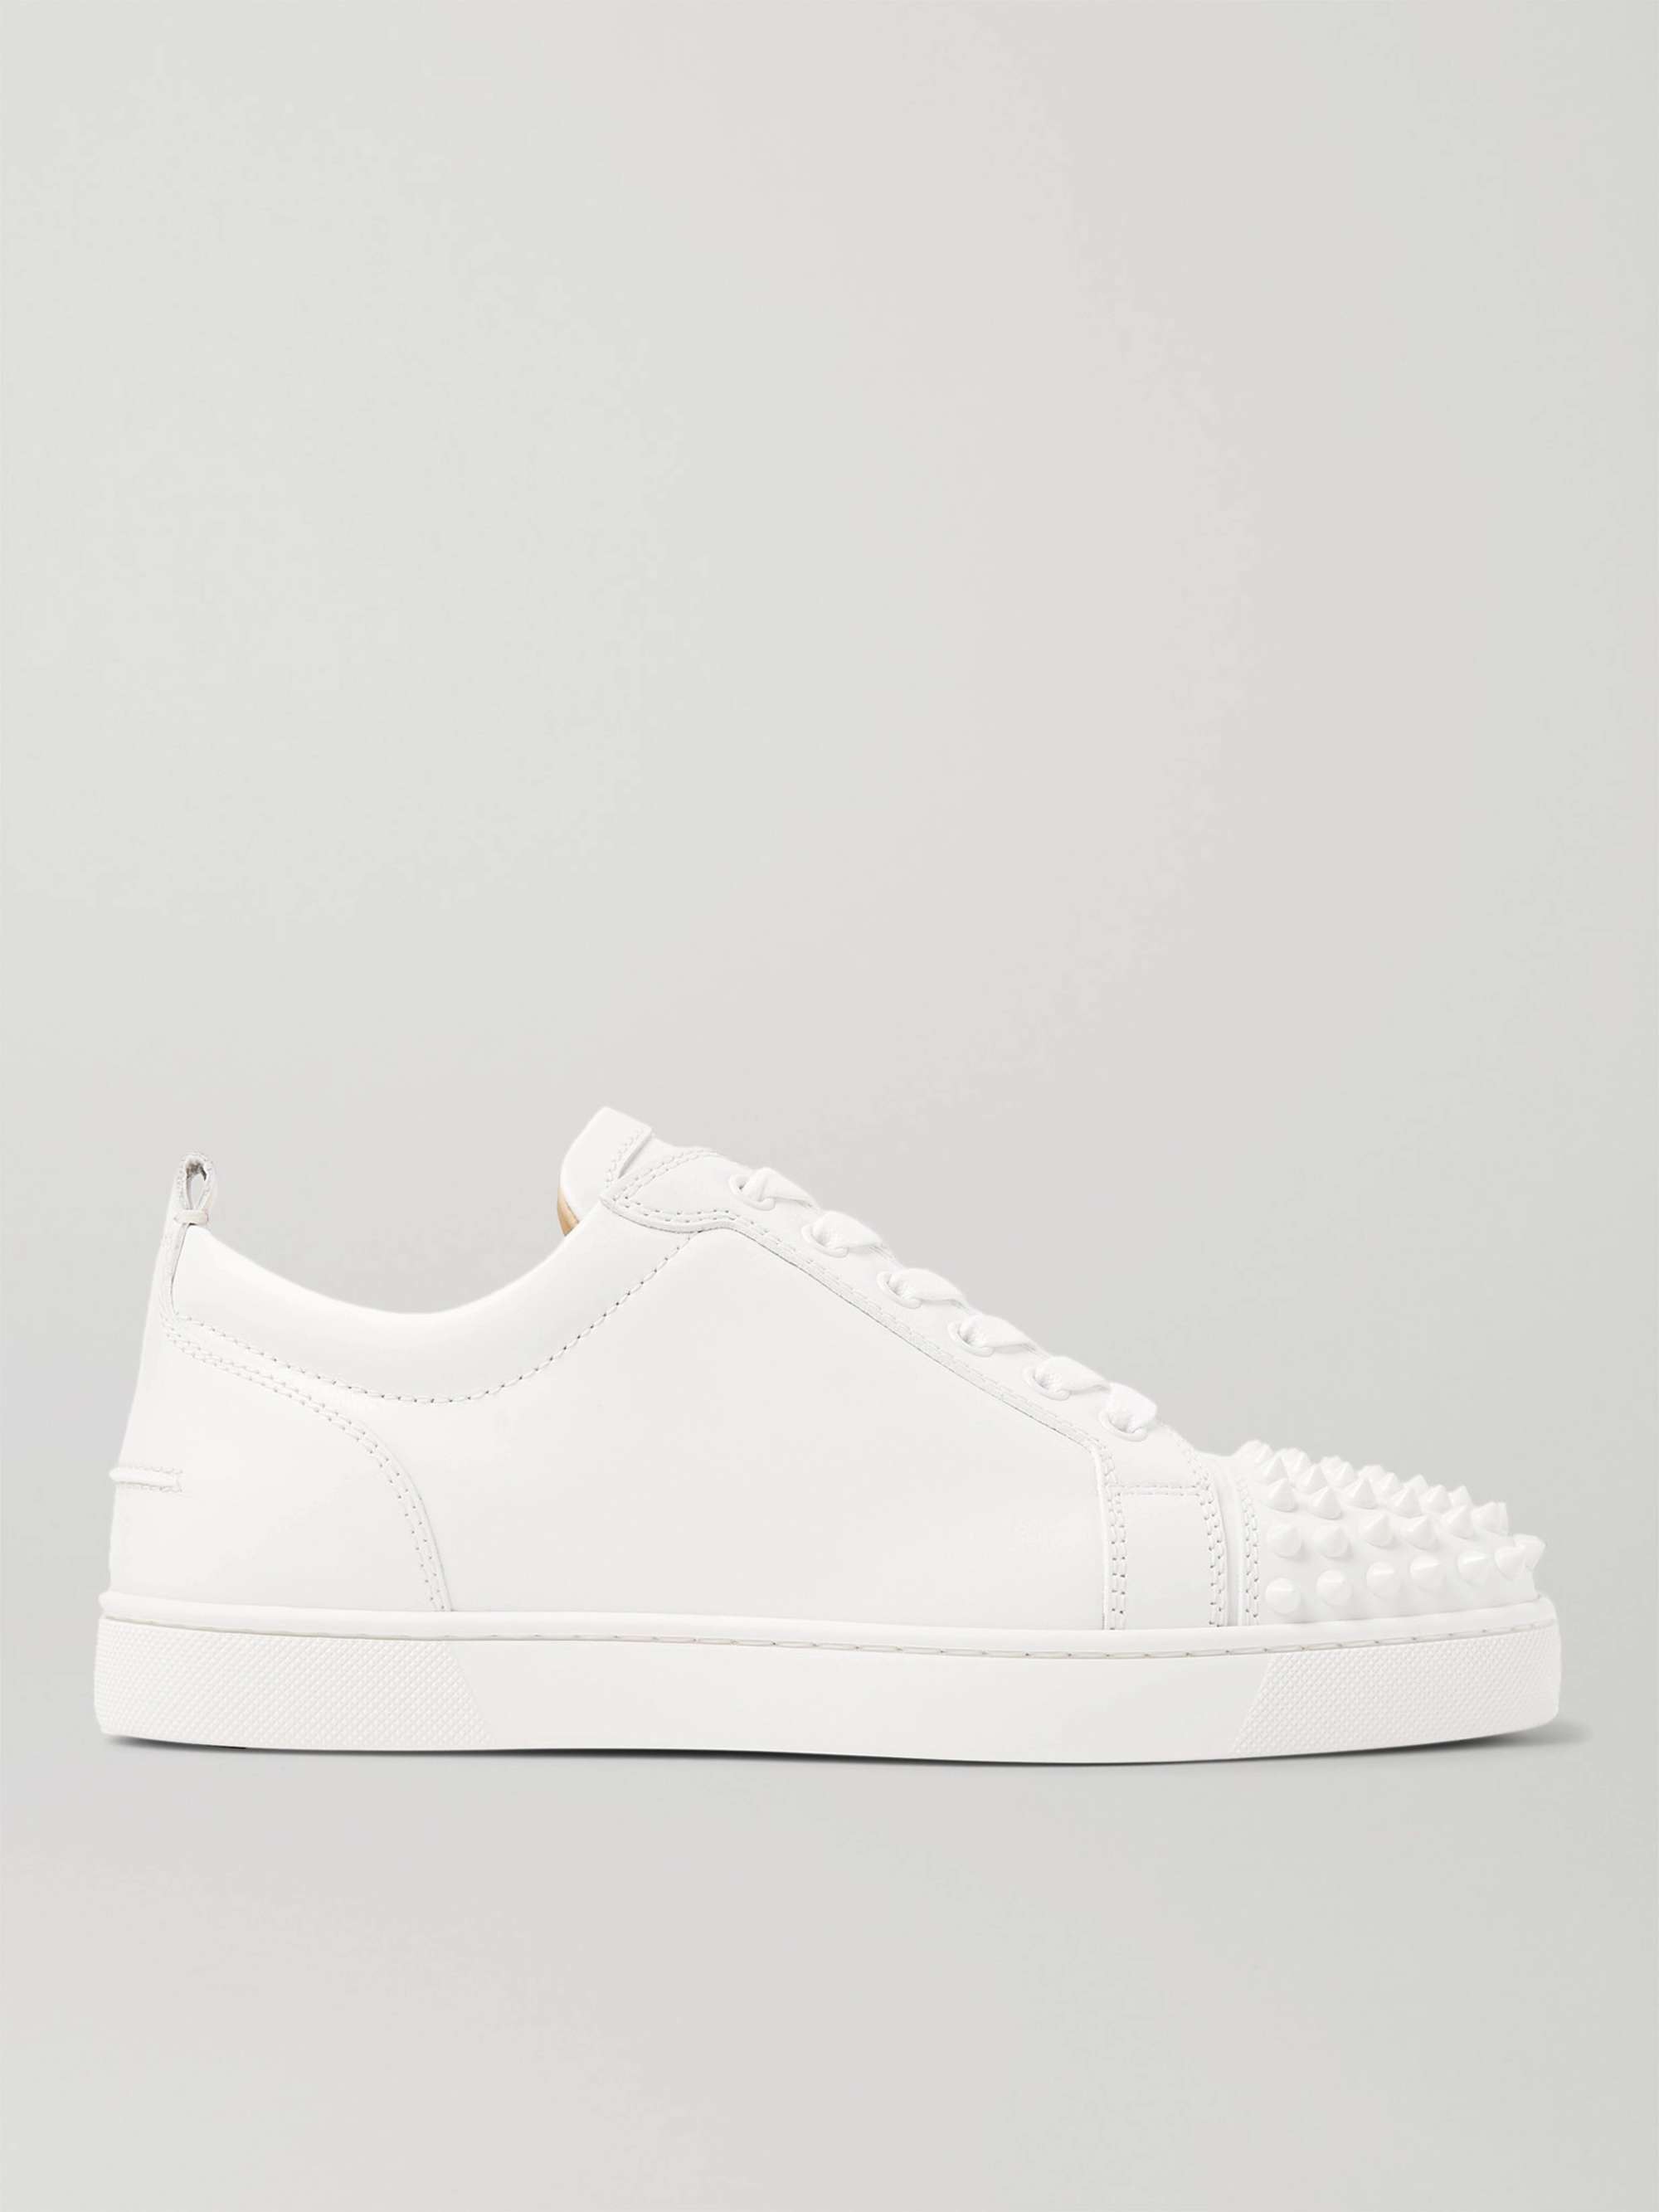 CHRISTIAN LOUBOUTIN Louis Junior Spikes Cap-Toe Suede Sneakers for